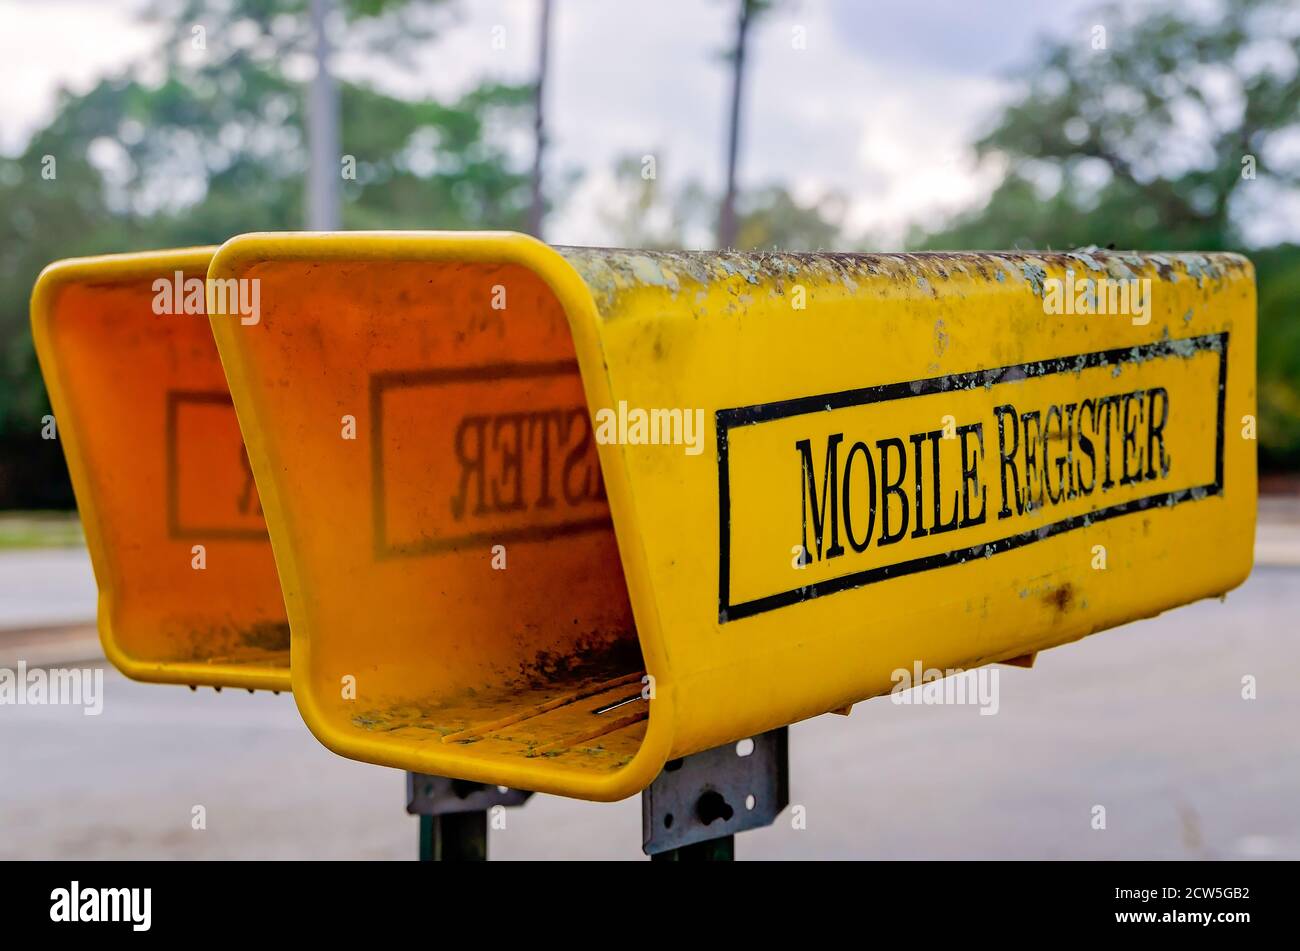 Newspaper holders offer receptacles for mail delivery of the Mobile Register, a local daily newspaper, Sept. 26, 2020, in Mobile, Alabama. Stock Photo